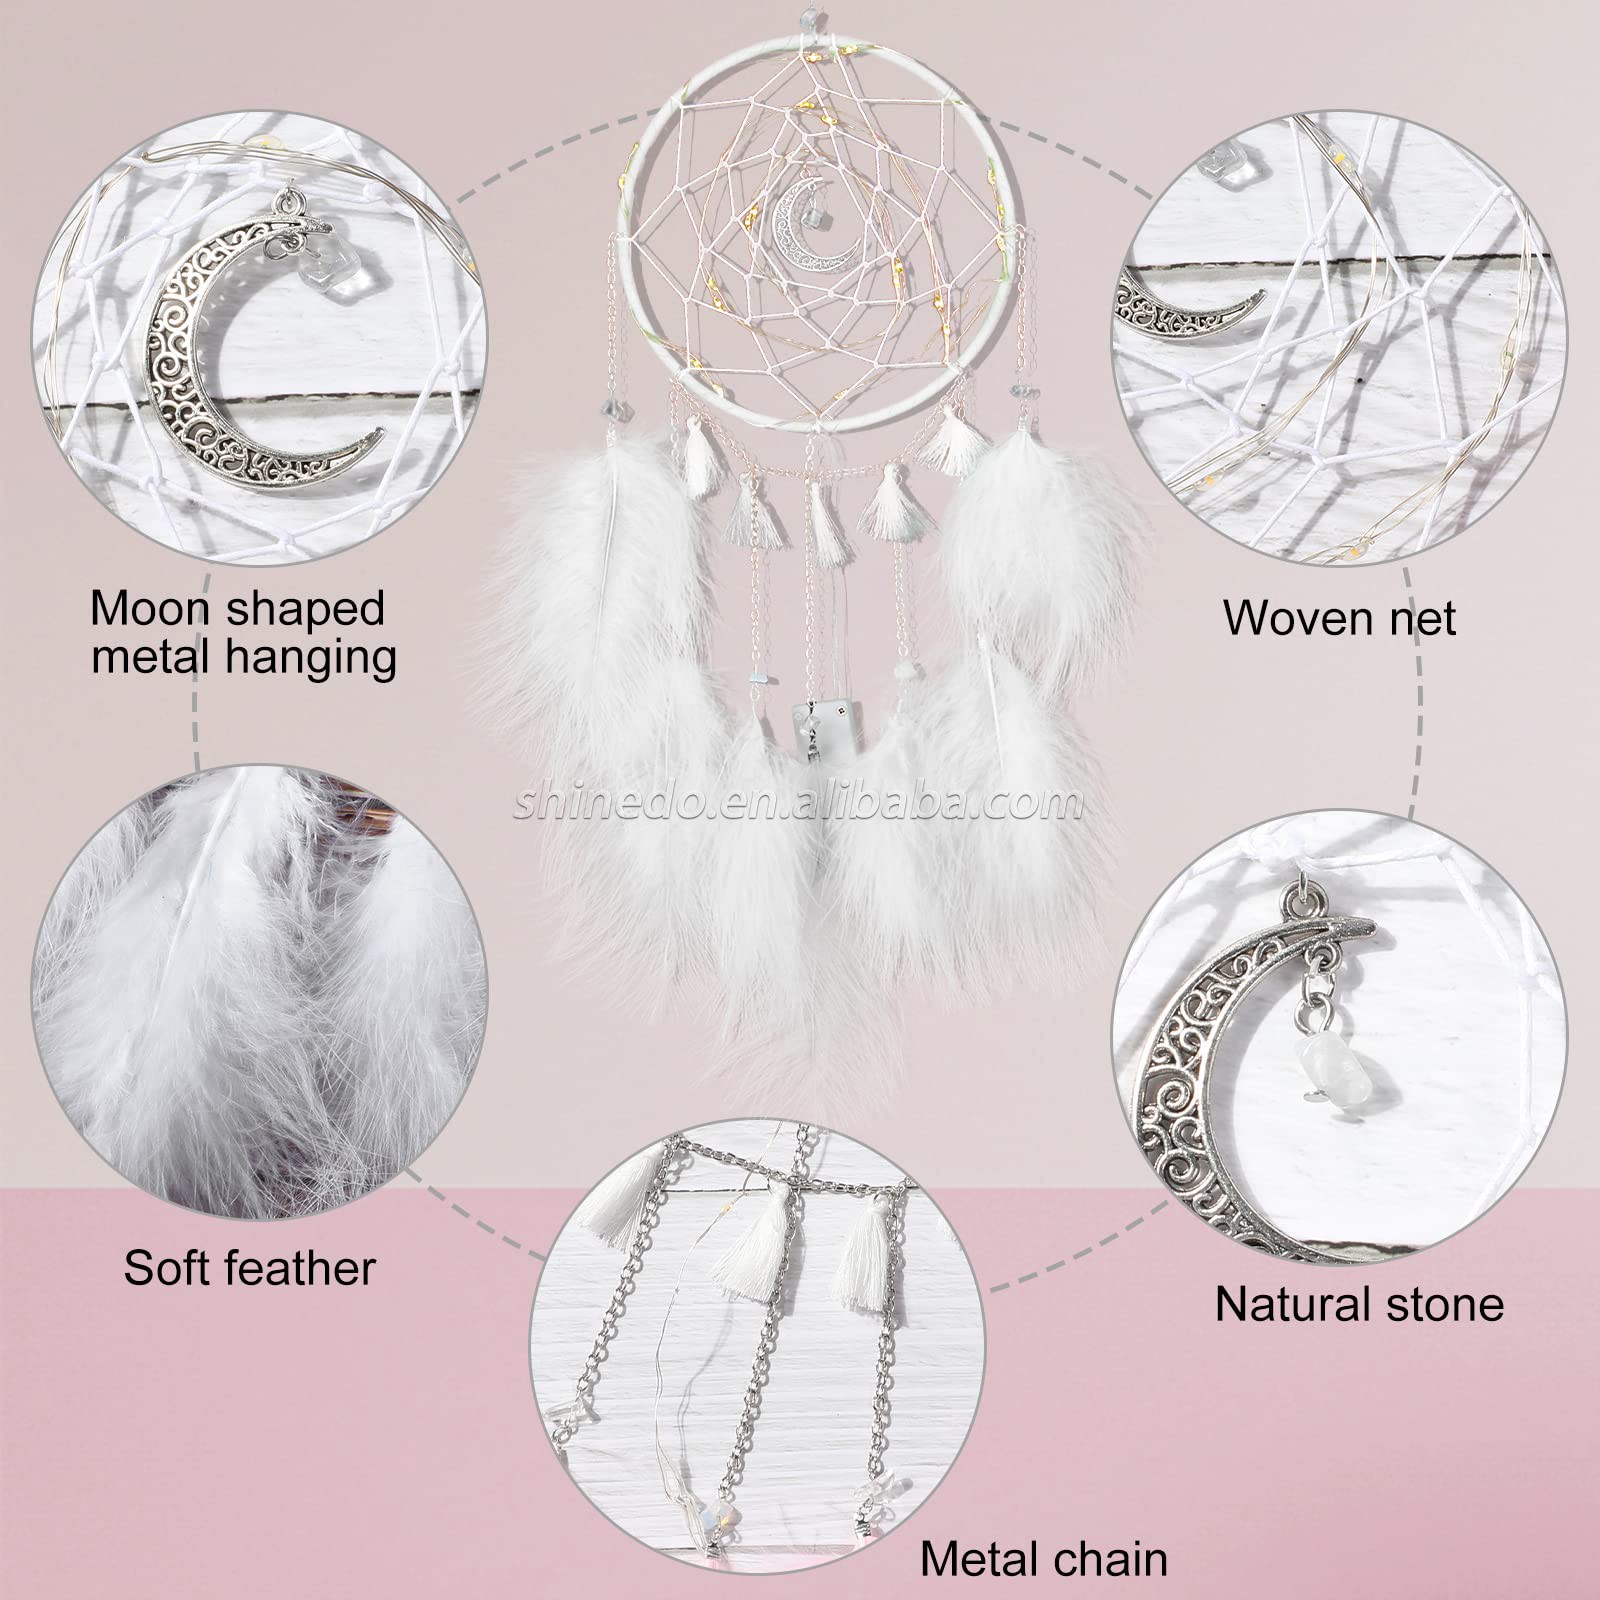 Handmade LED lights white feather dream catcher used for bedroom hanging wall interior decorations SD-SW199